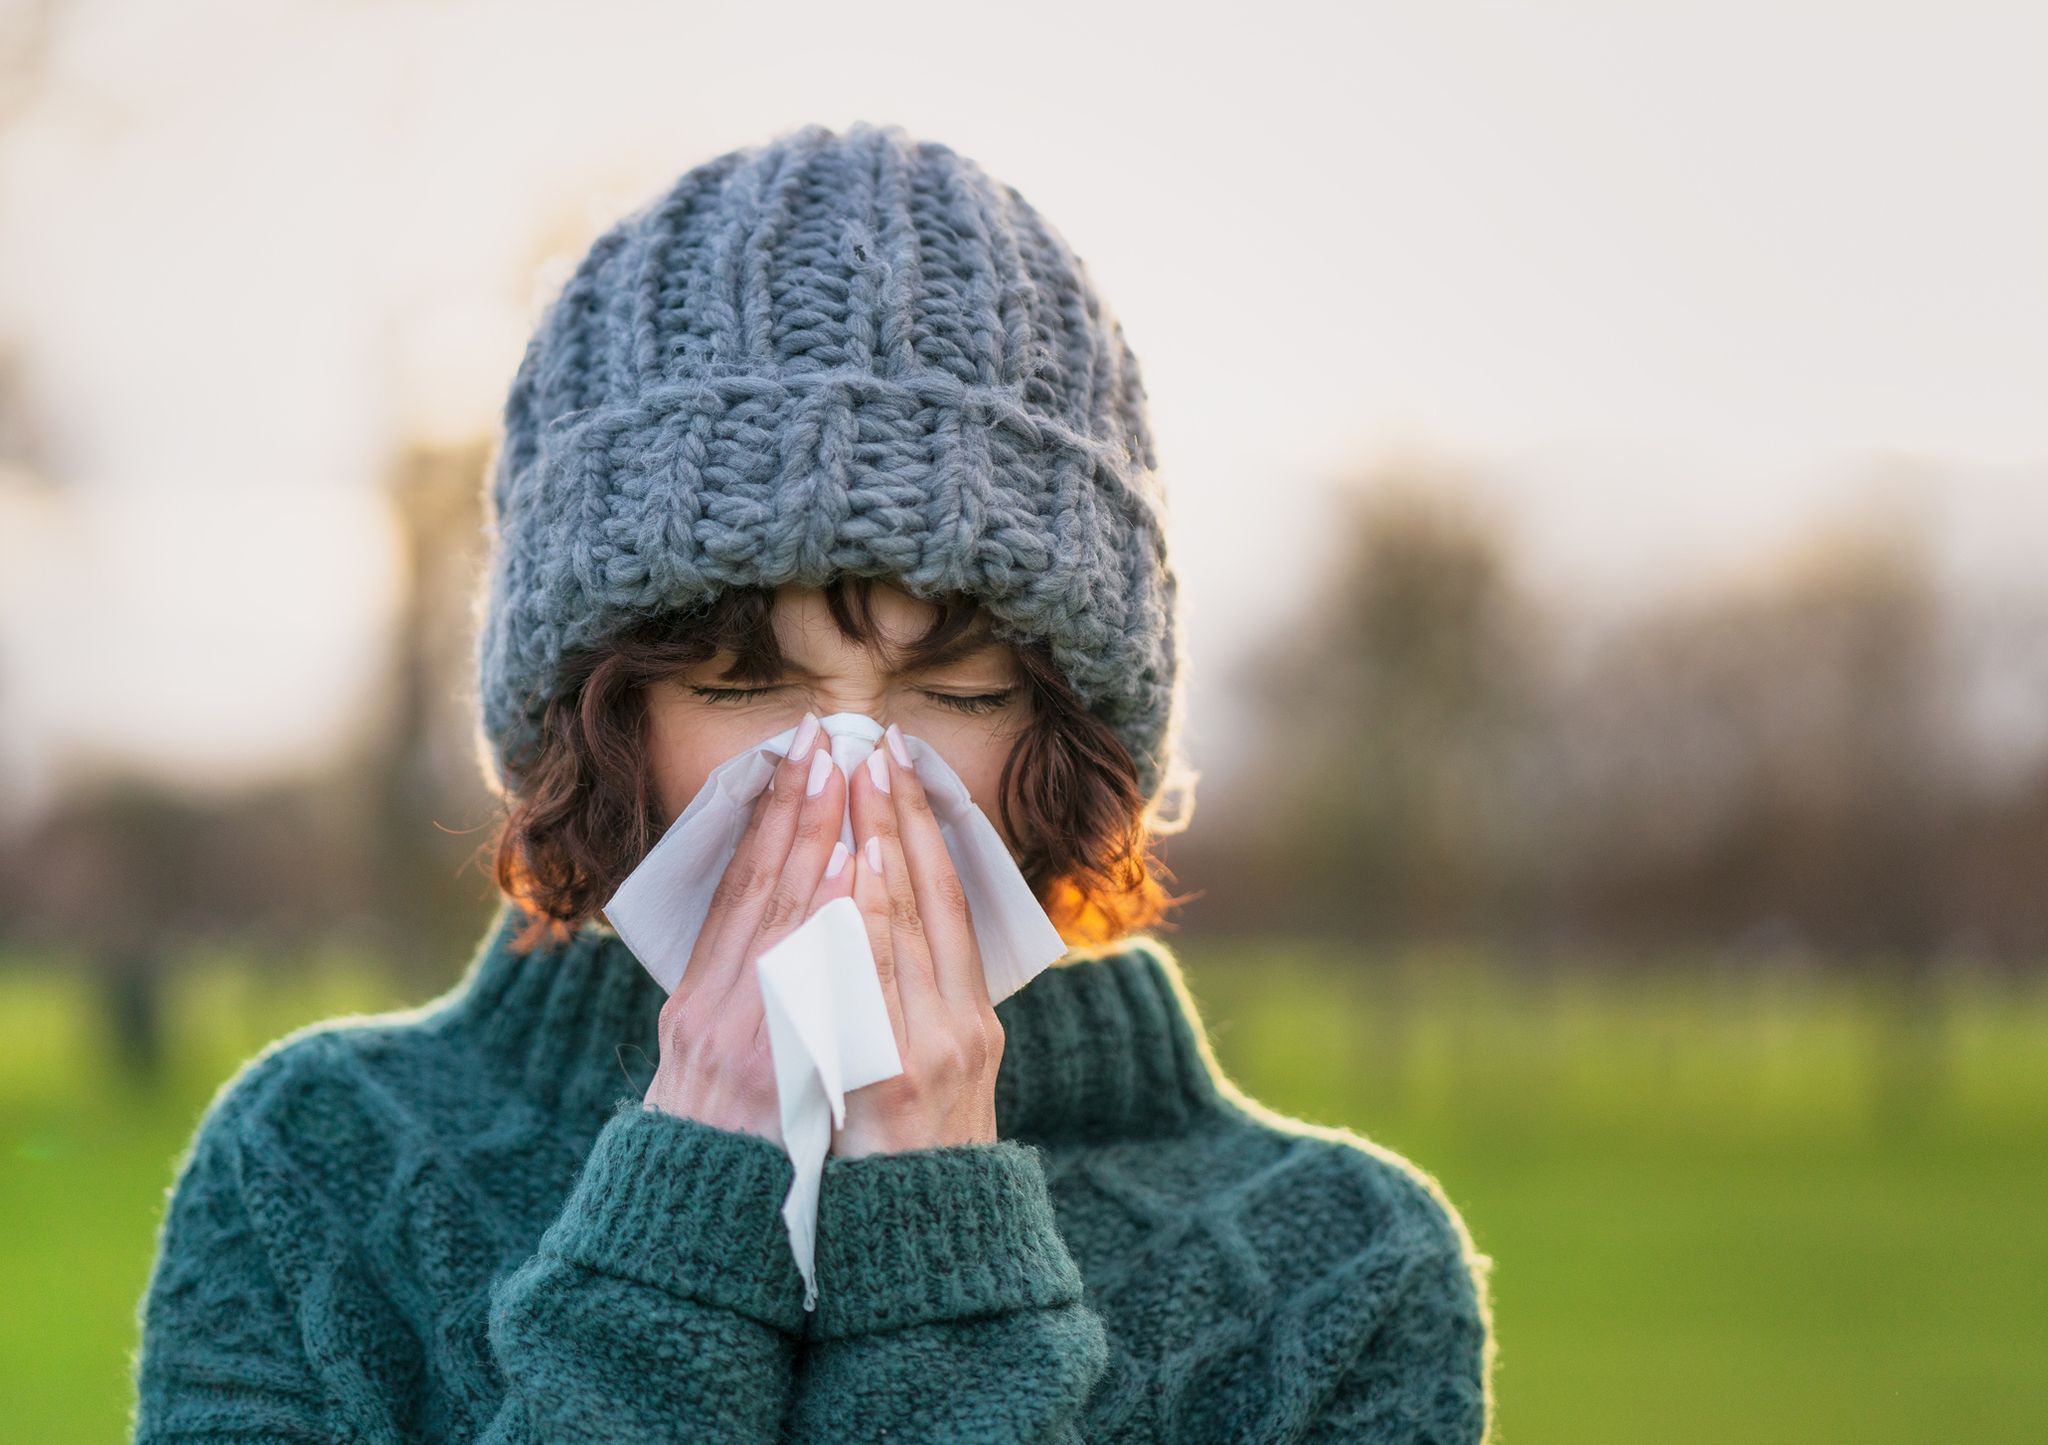 Running with a cold - should you go running when you're sick?